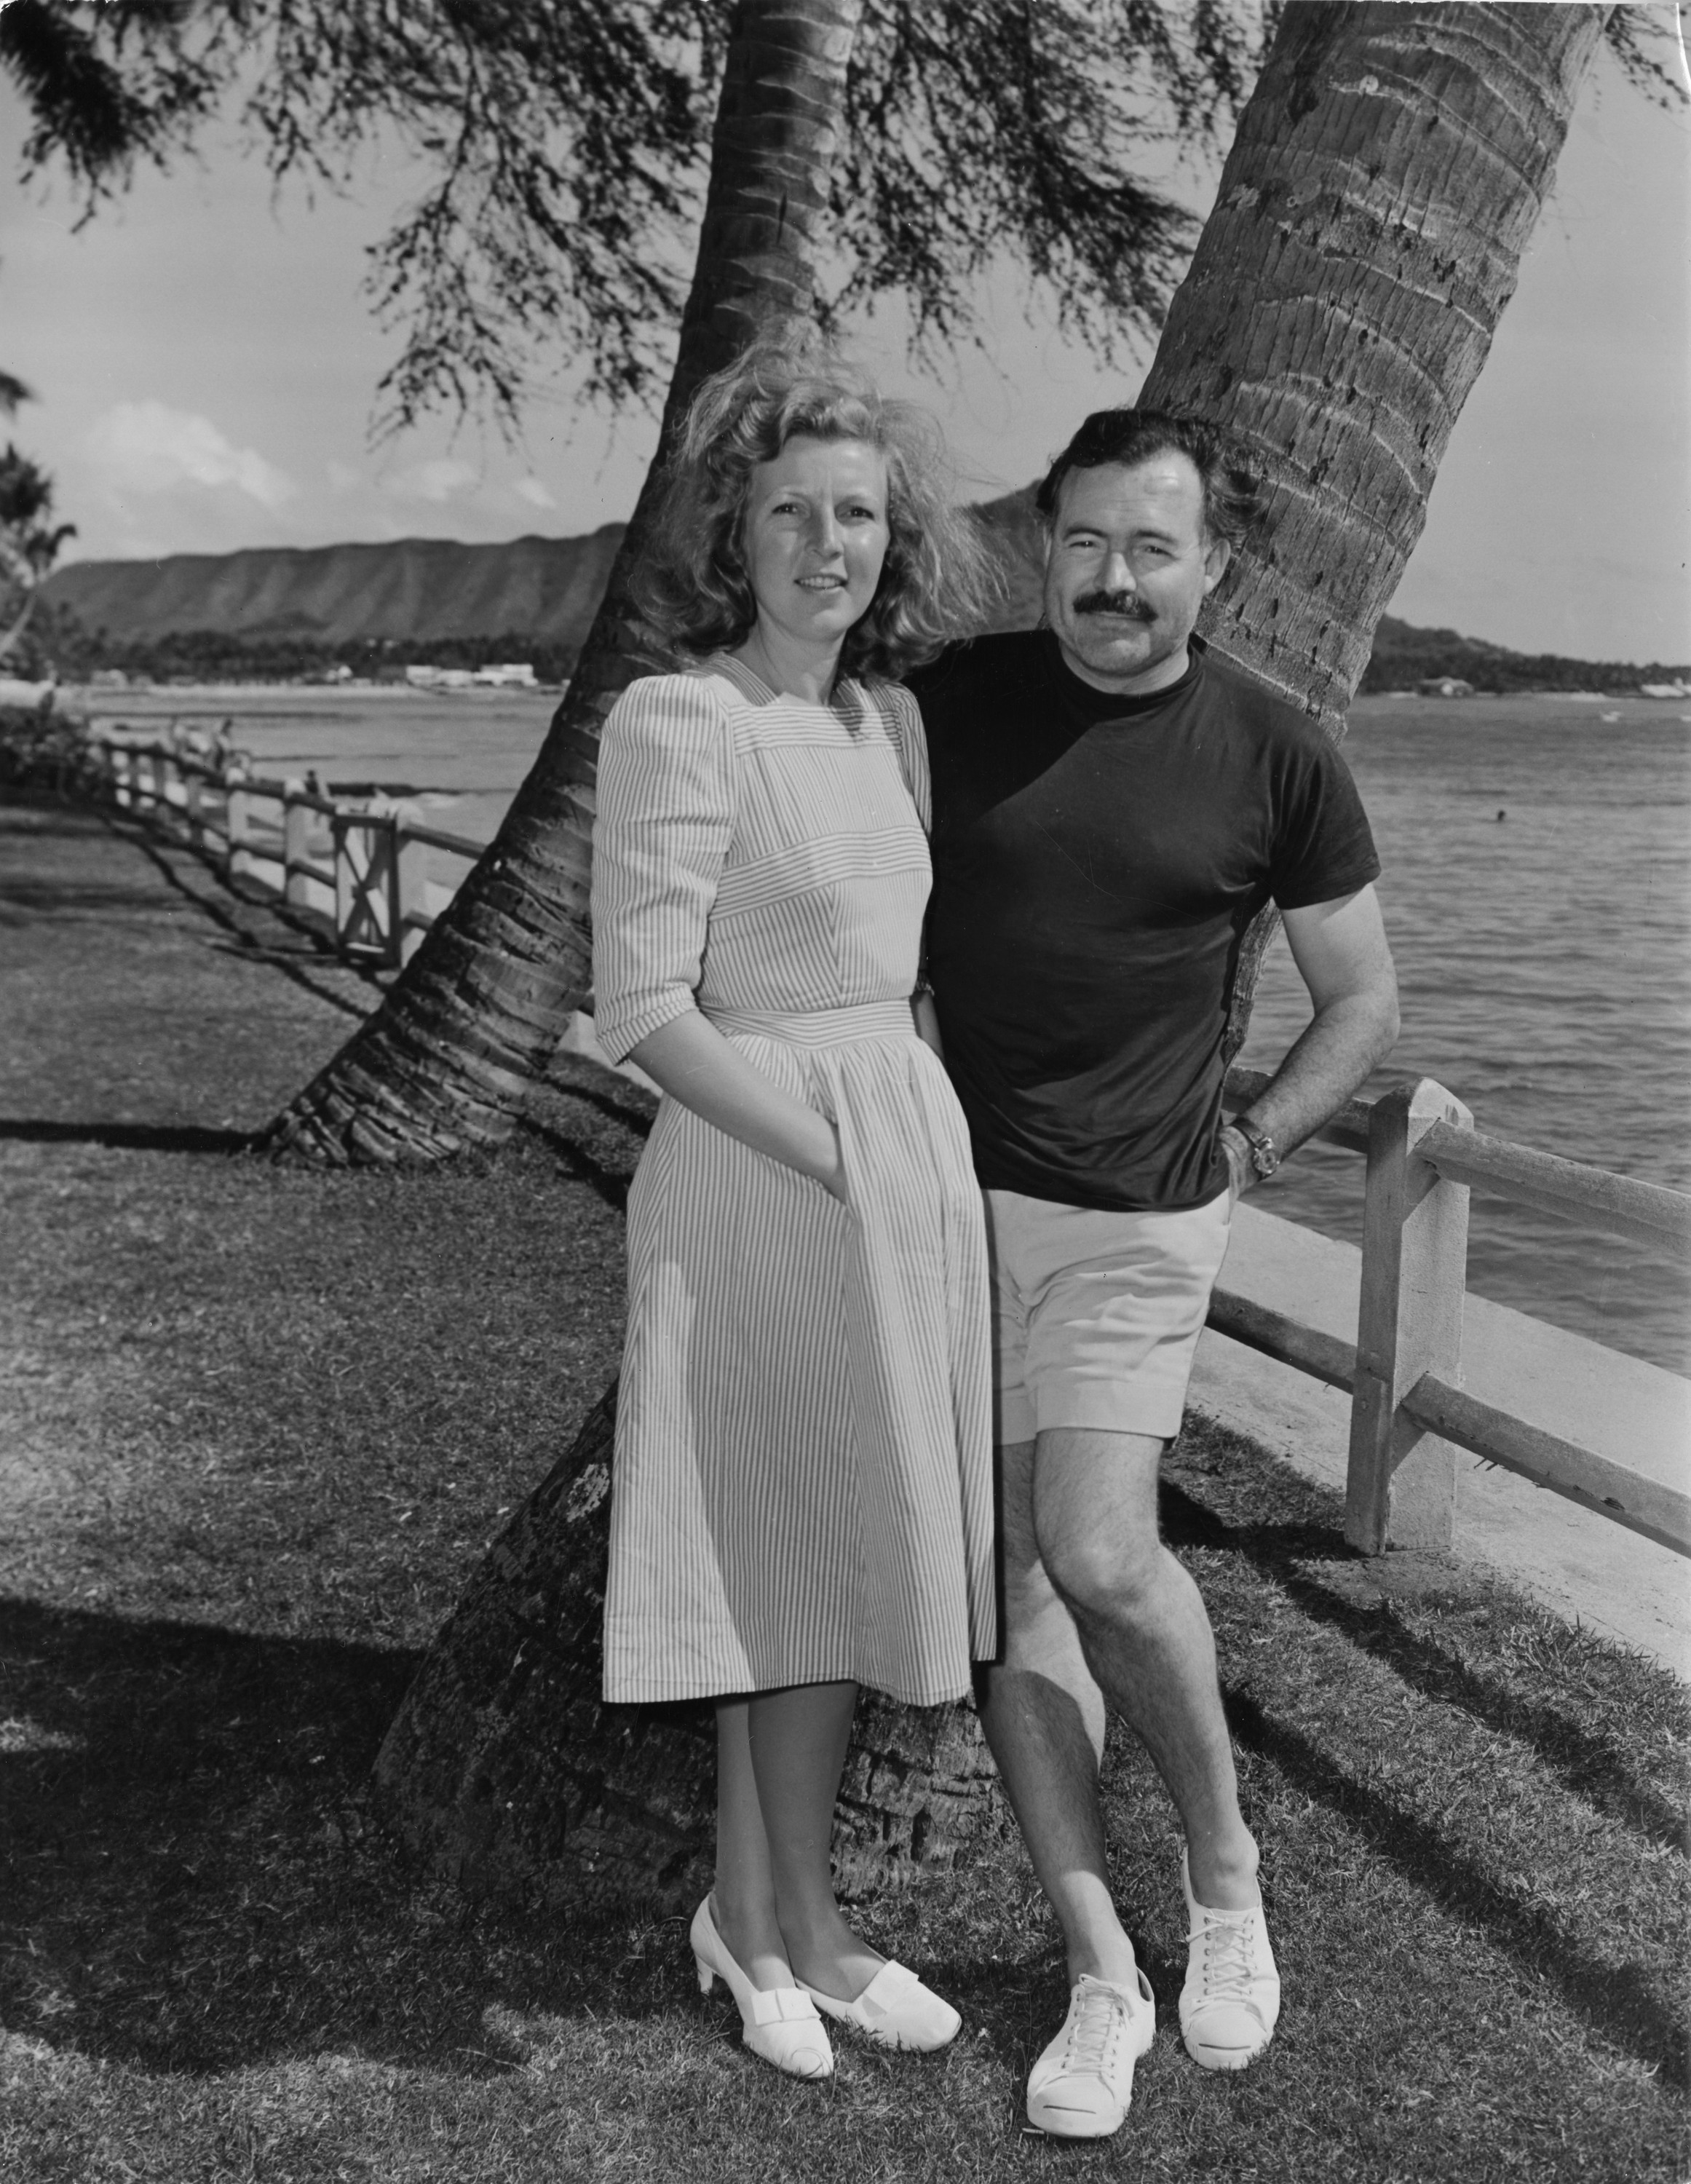 Black and white image of Ernest Hemingway, wearing a dark t-shirt, light shorts, and sneakers, and Martha Gellhorn, wearing a light striped dress and low-heeled light shoes, leaning against a palm trunk by the ocean.